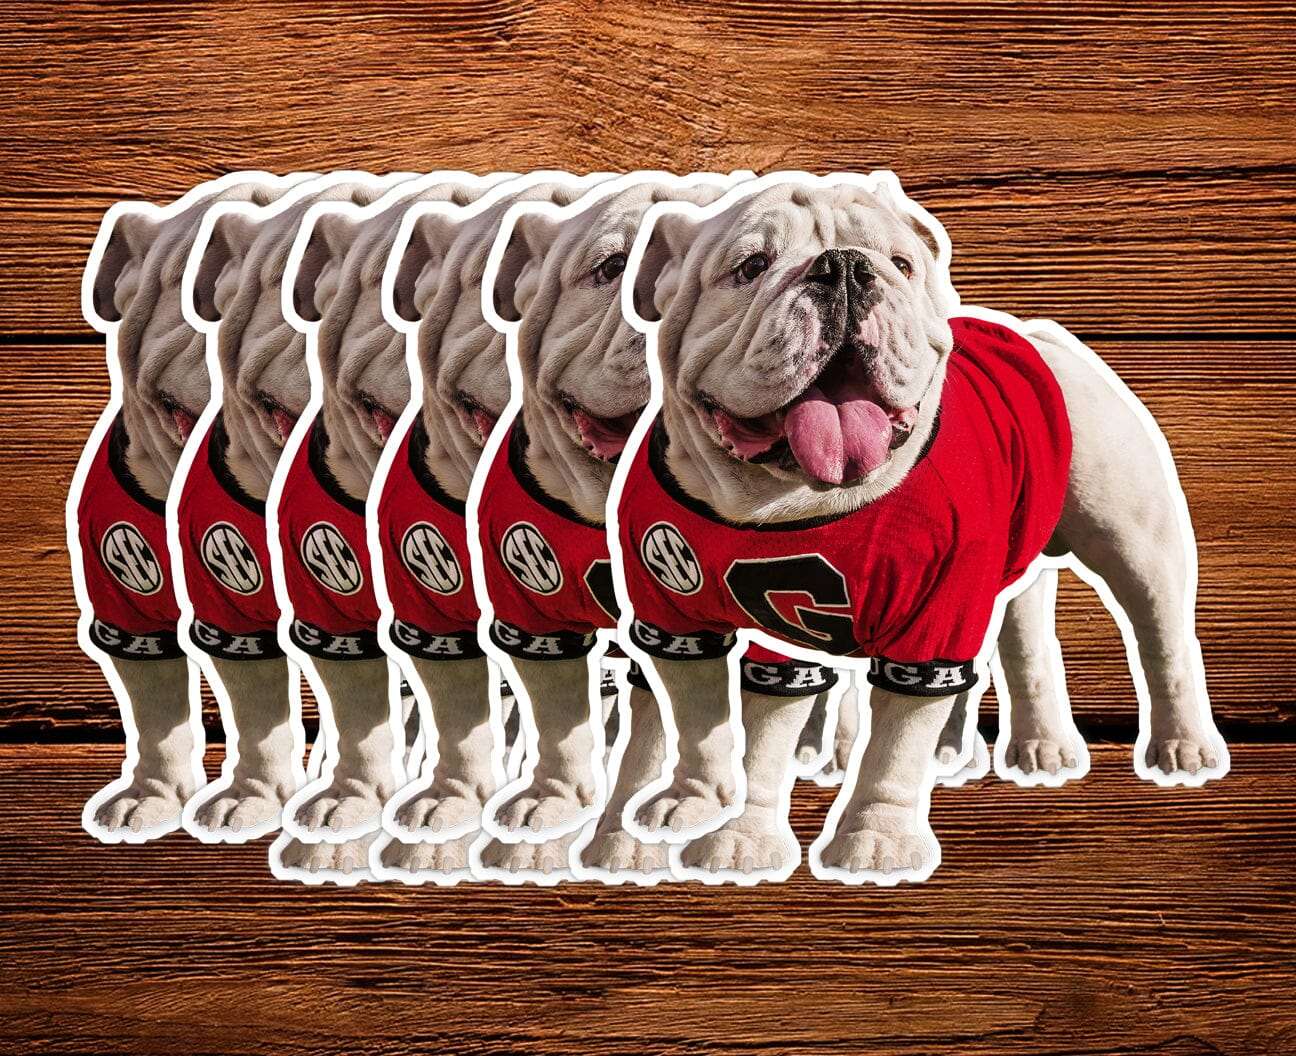 UGA Georgia Bulldogs Sticker 6-Pack - Uga X Mascot in the Endzone - 2.75" Die Cut Vinyl Photo Decal for Gift Wrap, Graduation Invitations, Stationary - WRIGHT PHOTO